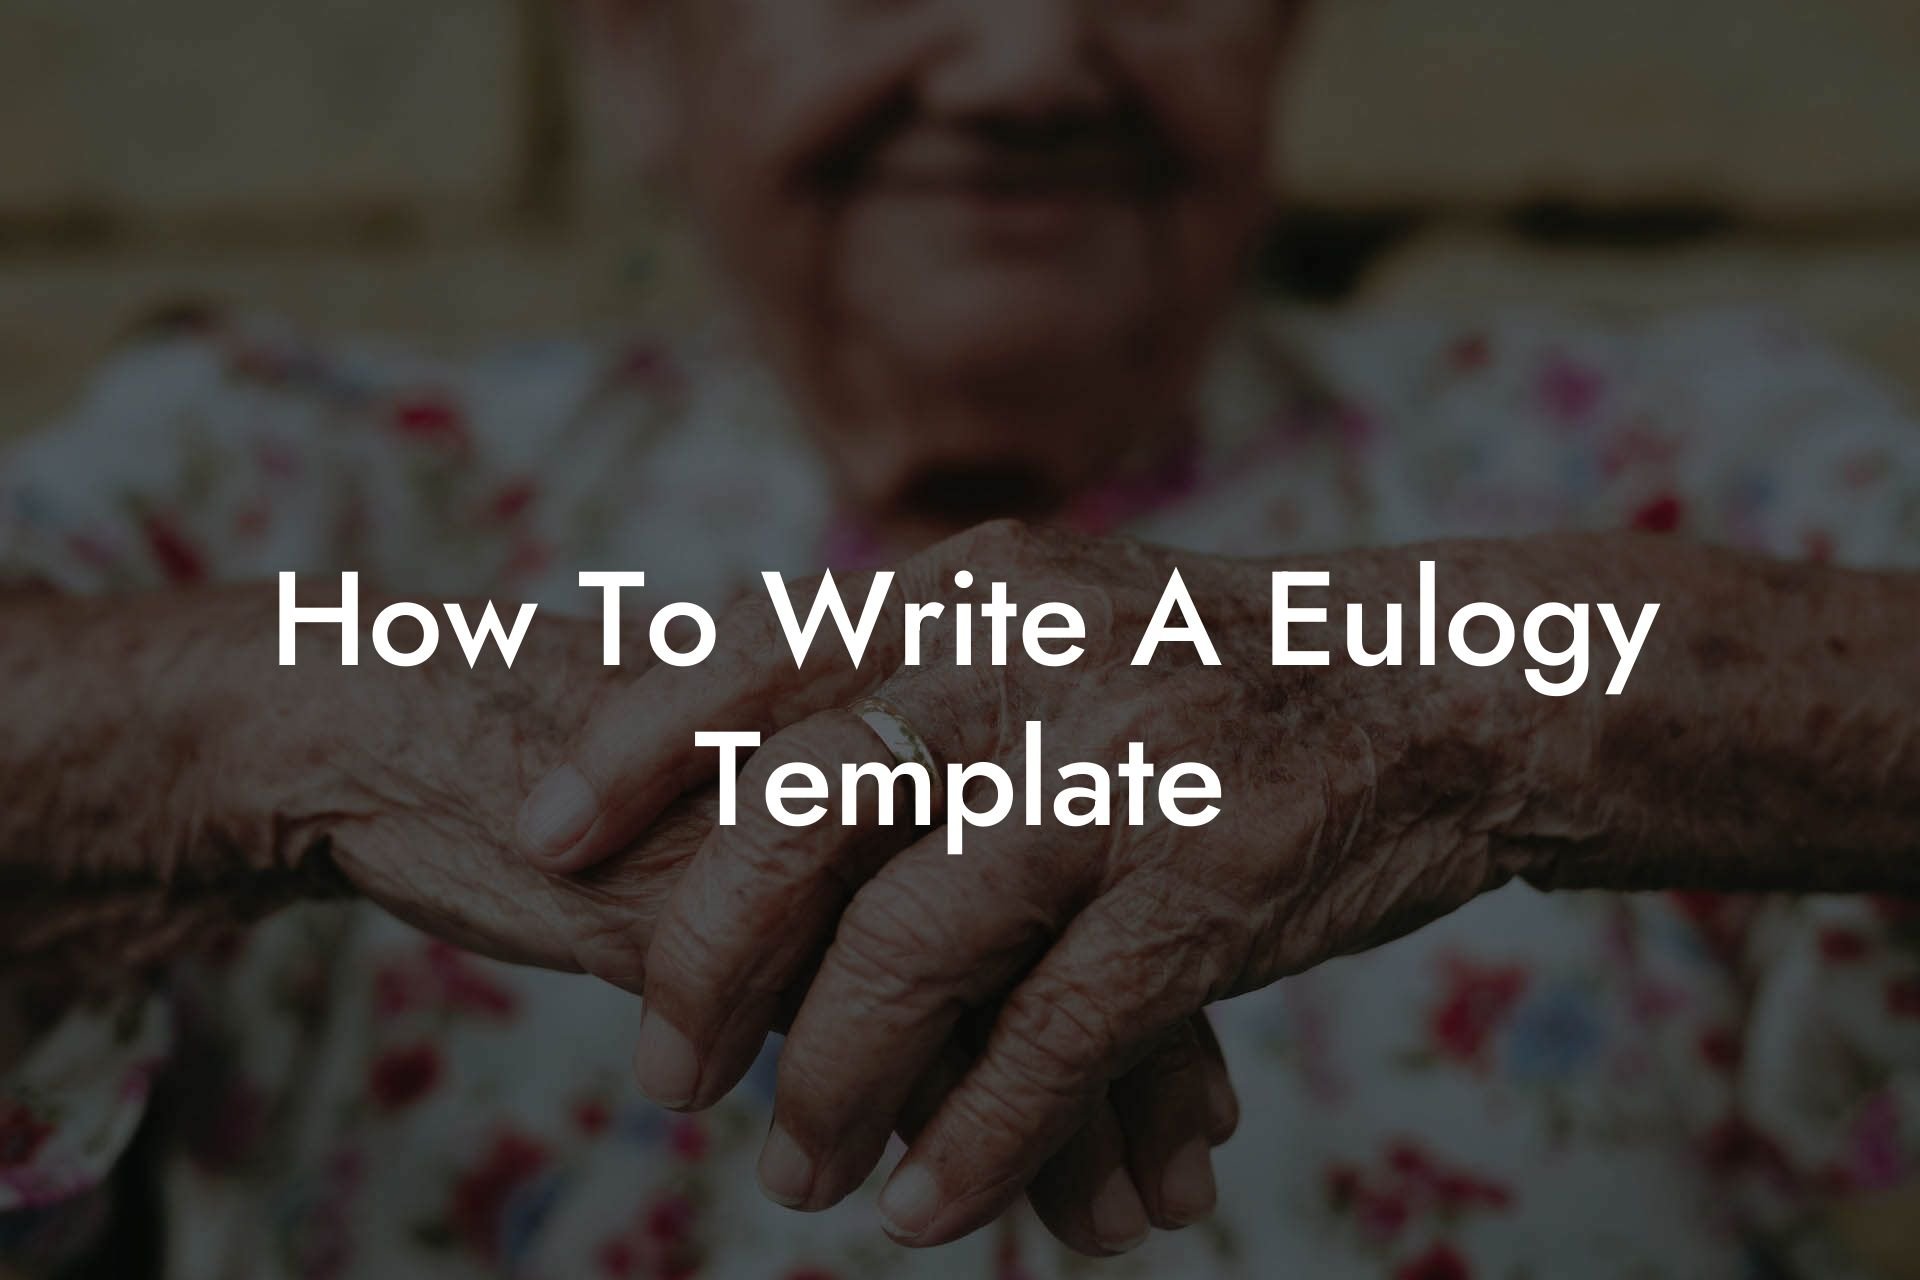 How To Write A Eulogy Template